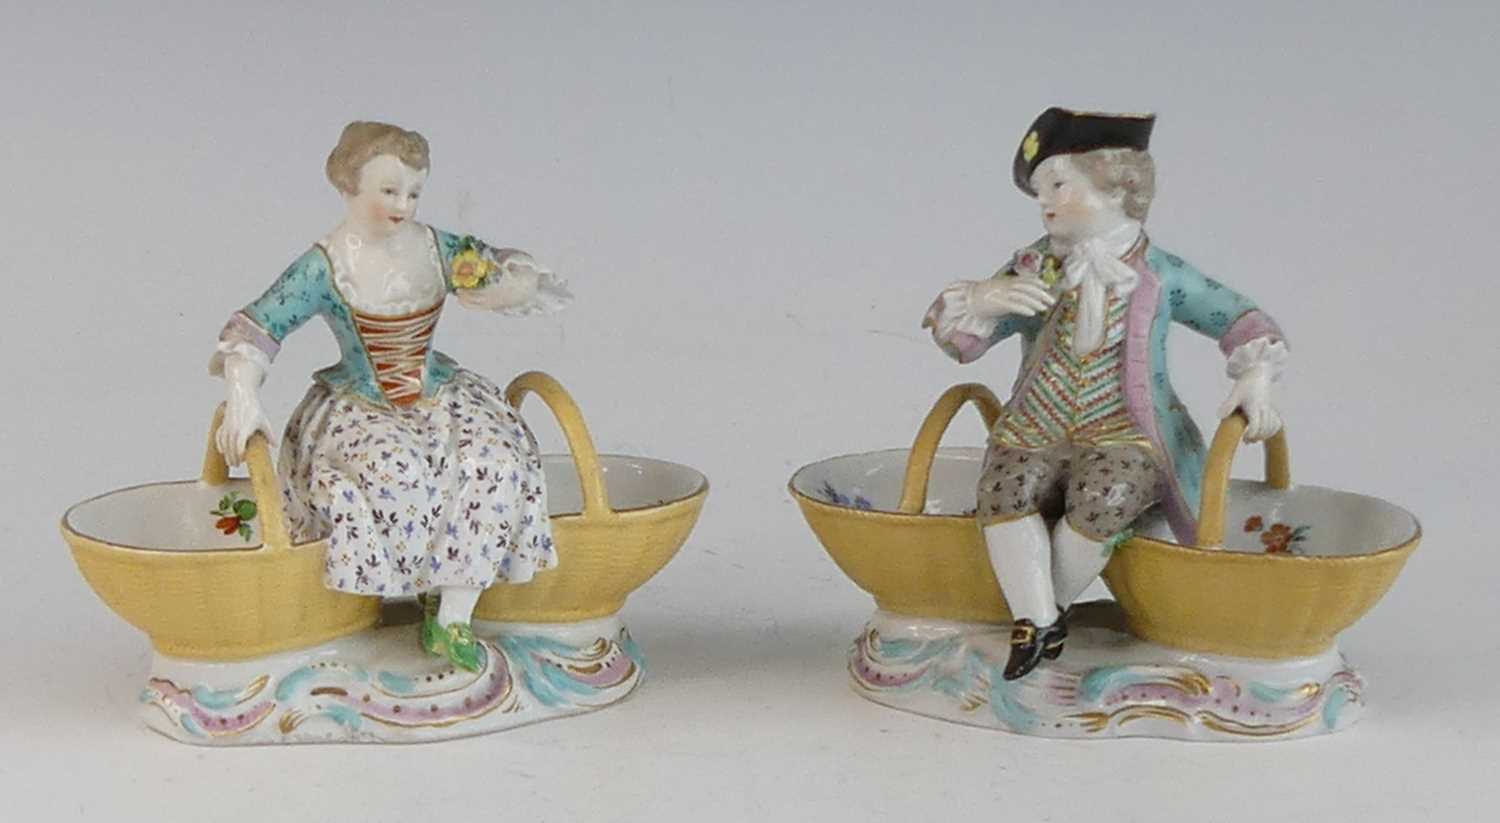 A pair of Meissen porcelain figural table salts, late 19th century, each shown in 18th century